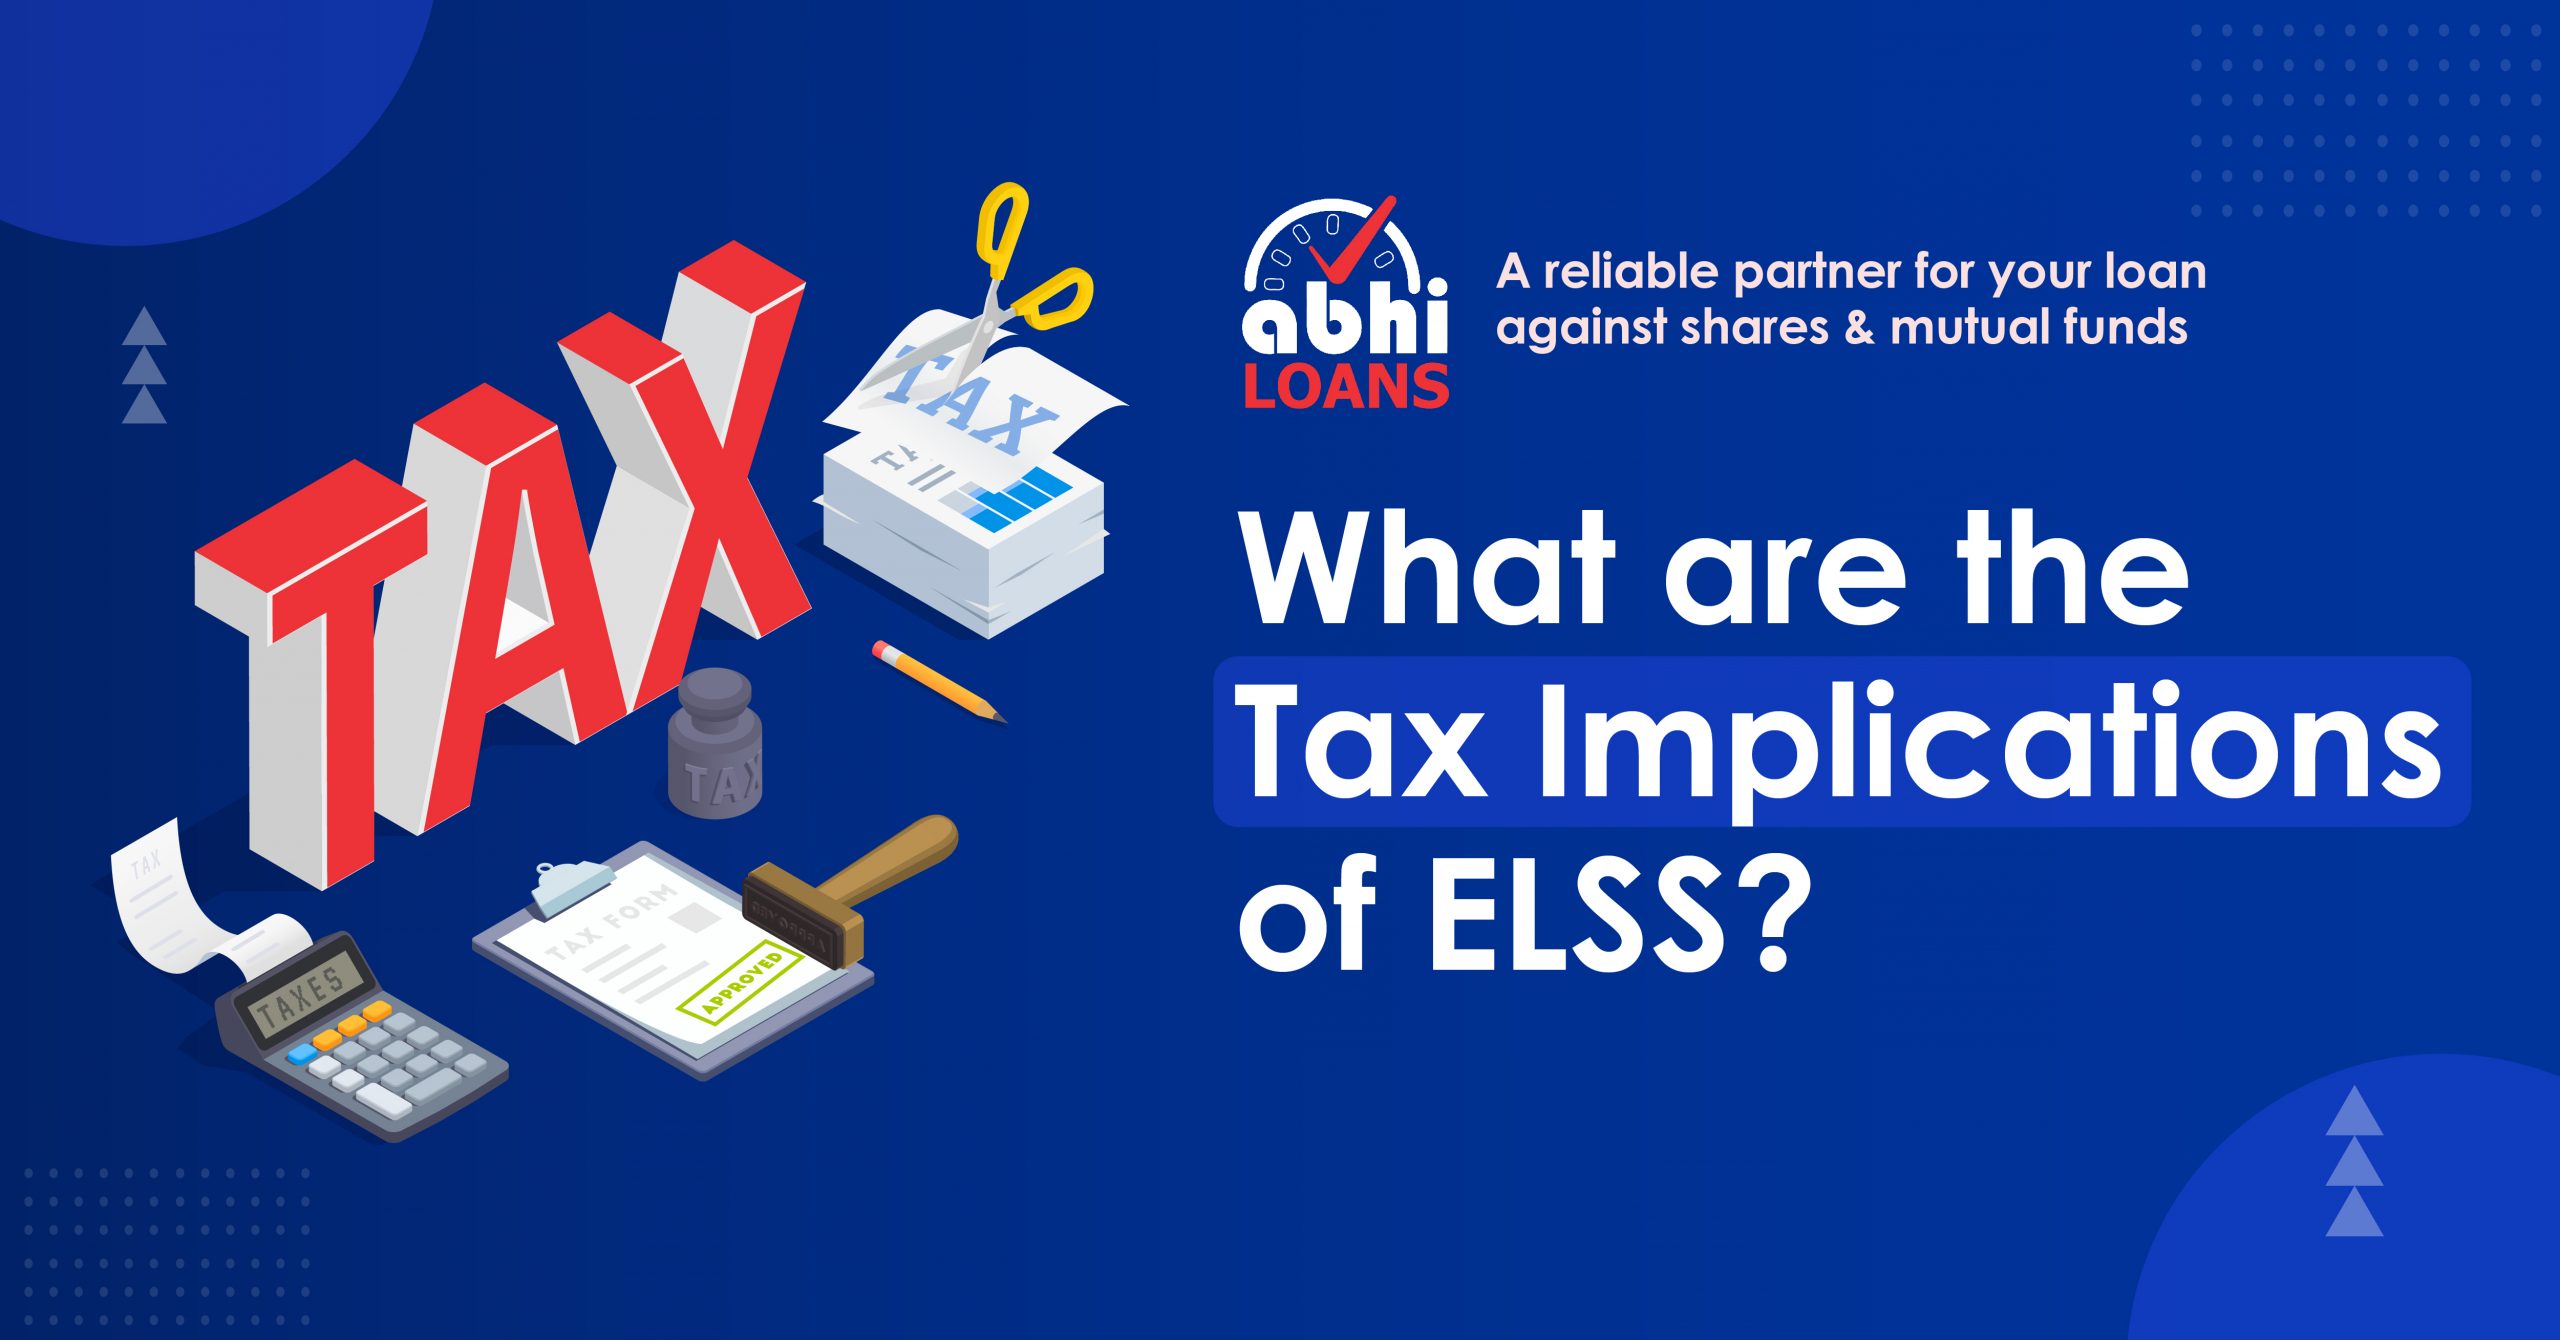 What are the Tax Implications of ELSS?